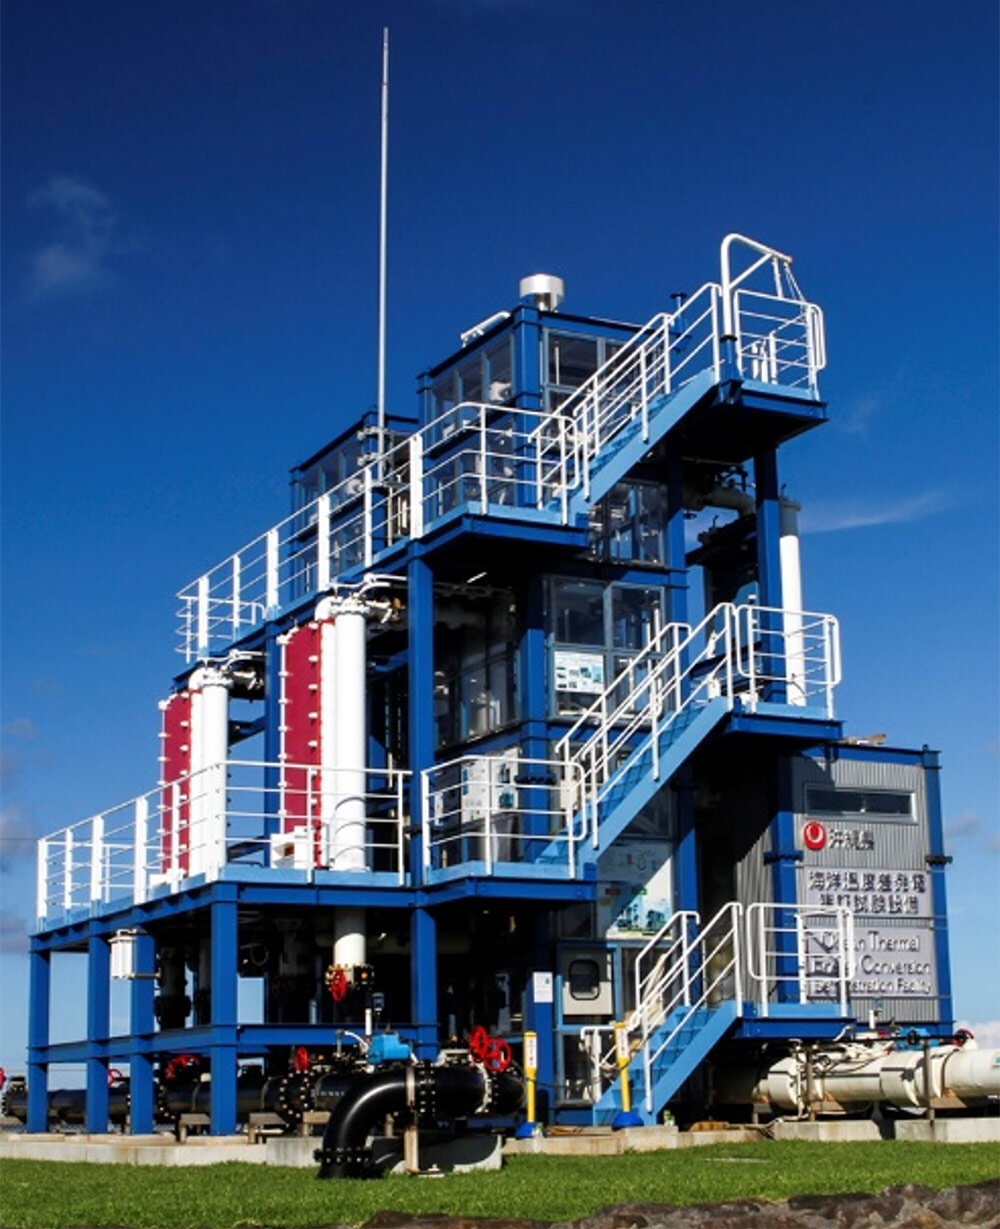 Ocean thermal energy conversion demonstration test facility owned by okinawa prefecture